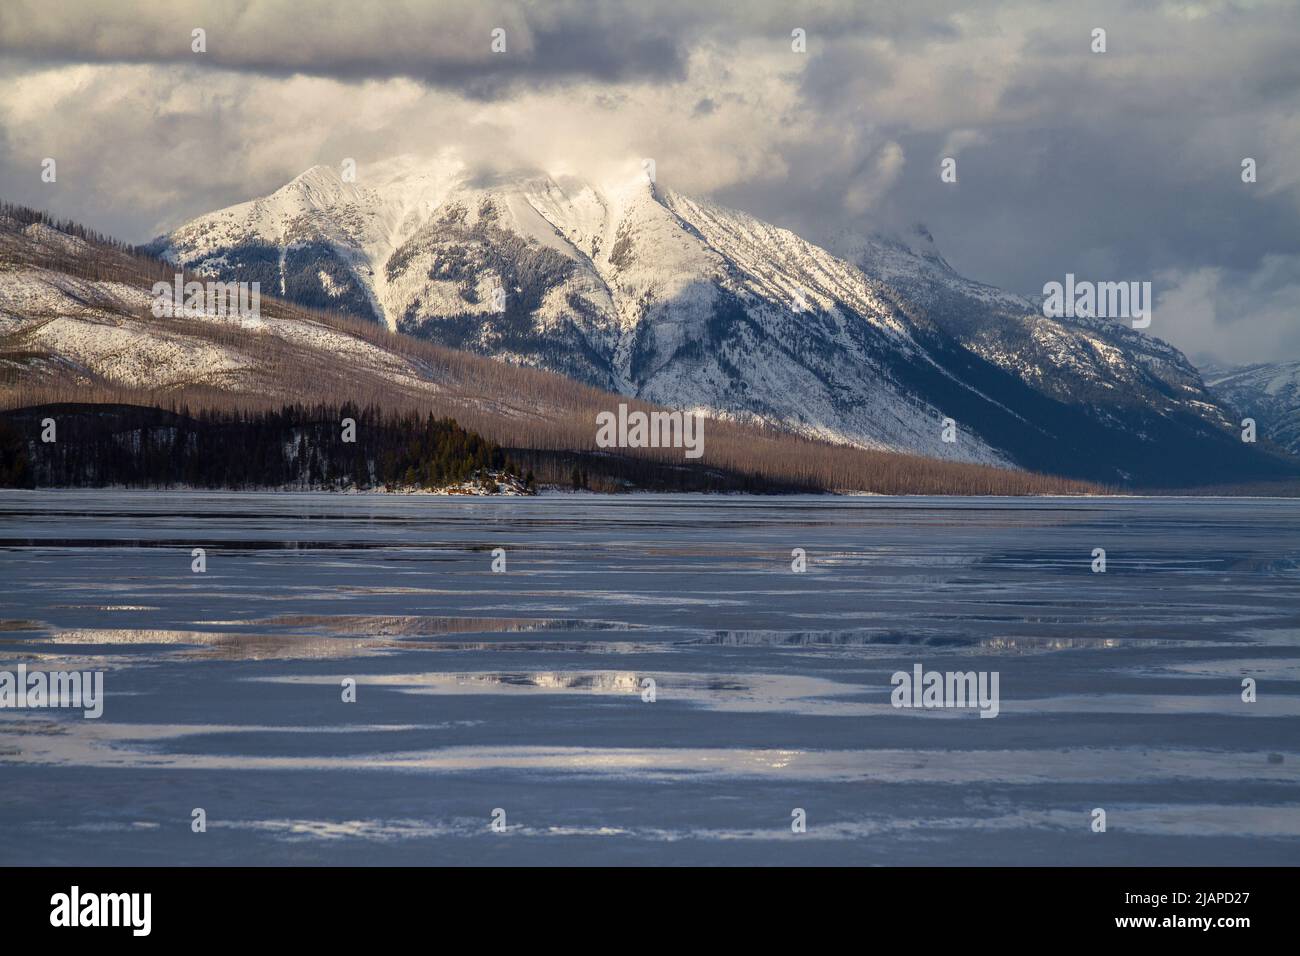 Stanton Mountain and frozen Lake McDonald in Glacier National Park, Montana, United States of America.  An optimised version of a US National Park Service. Photo credit: NPS/D.Restivo Stock Photo